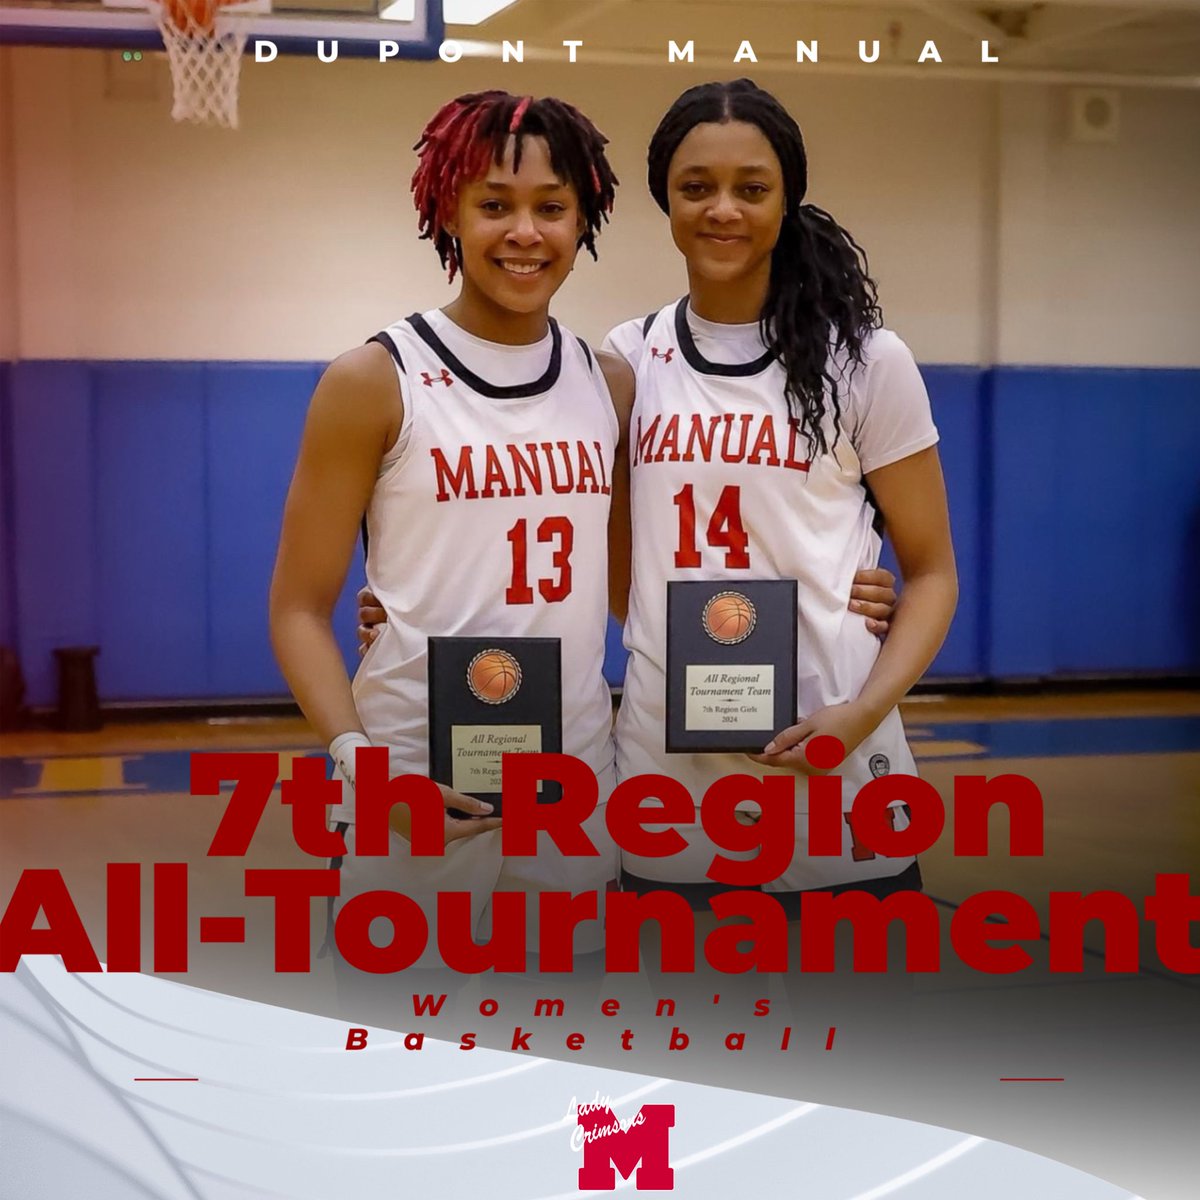 Congratulations to @Londyn_James24 and @Ash_Hoops3 on making the 7th Region all tournament team!